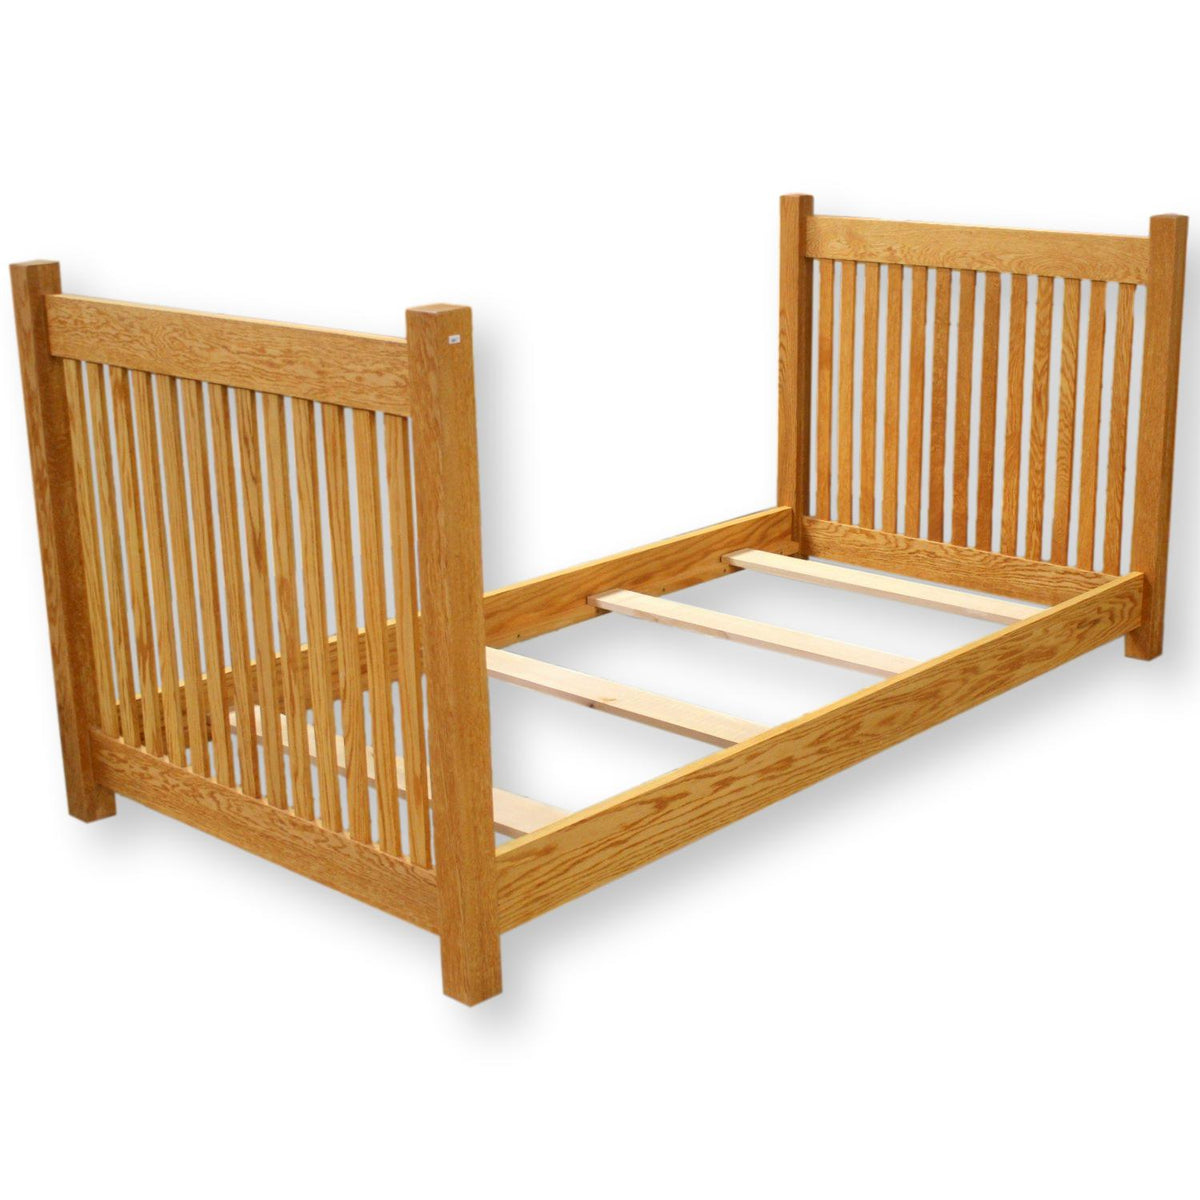 Wooden Expressions Twin XL Size Craftsman Oak Bed